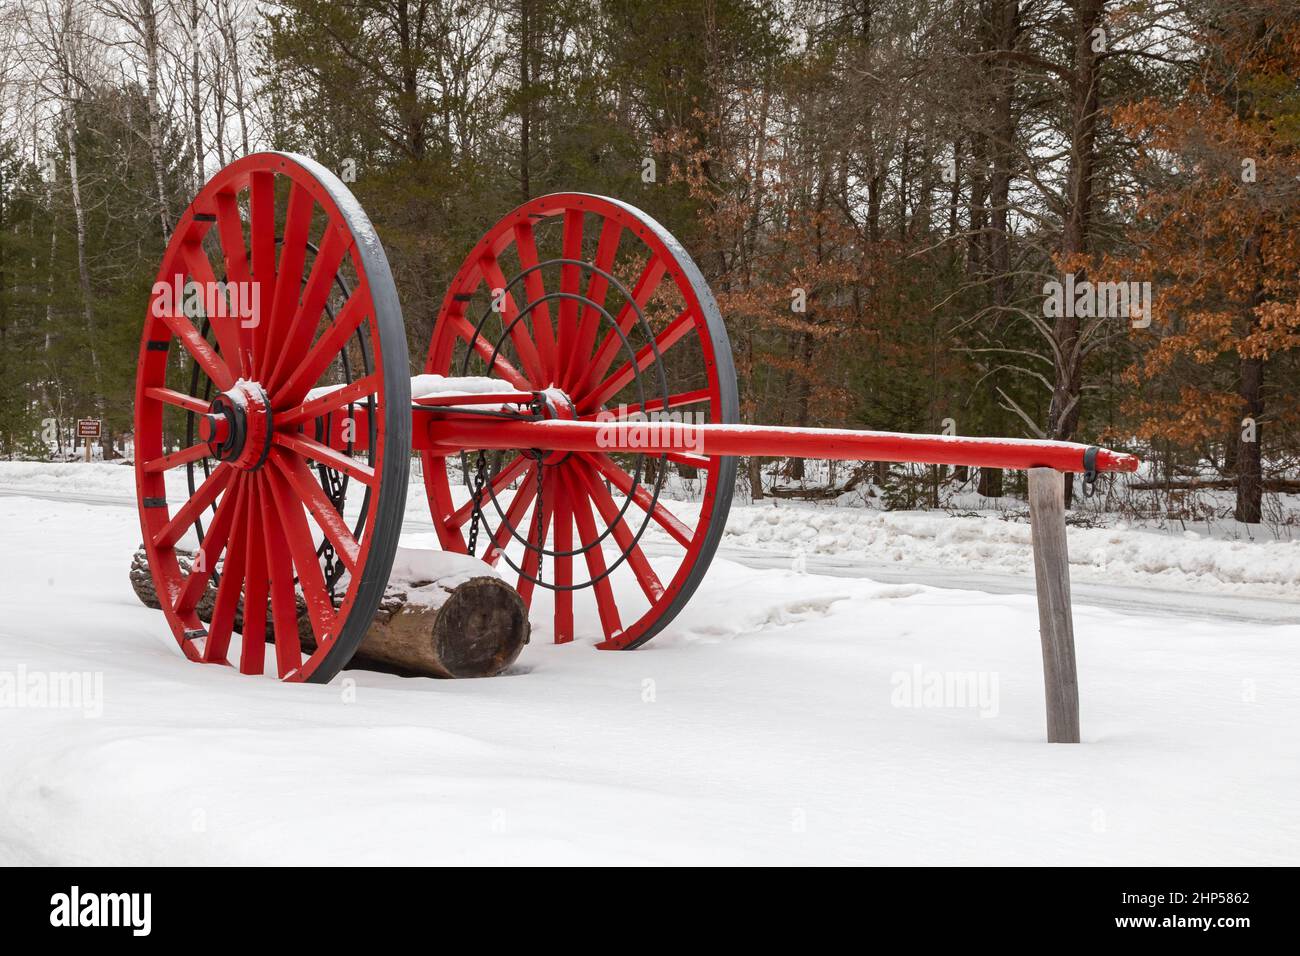 Grayling, Michigan - A Big Wheel used for transporting logs on display at Hartwick Pines State Park. The park displays logging equipment from the 19th Stock Photo